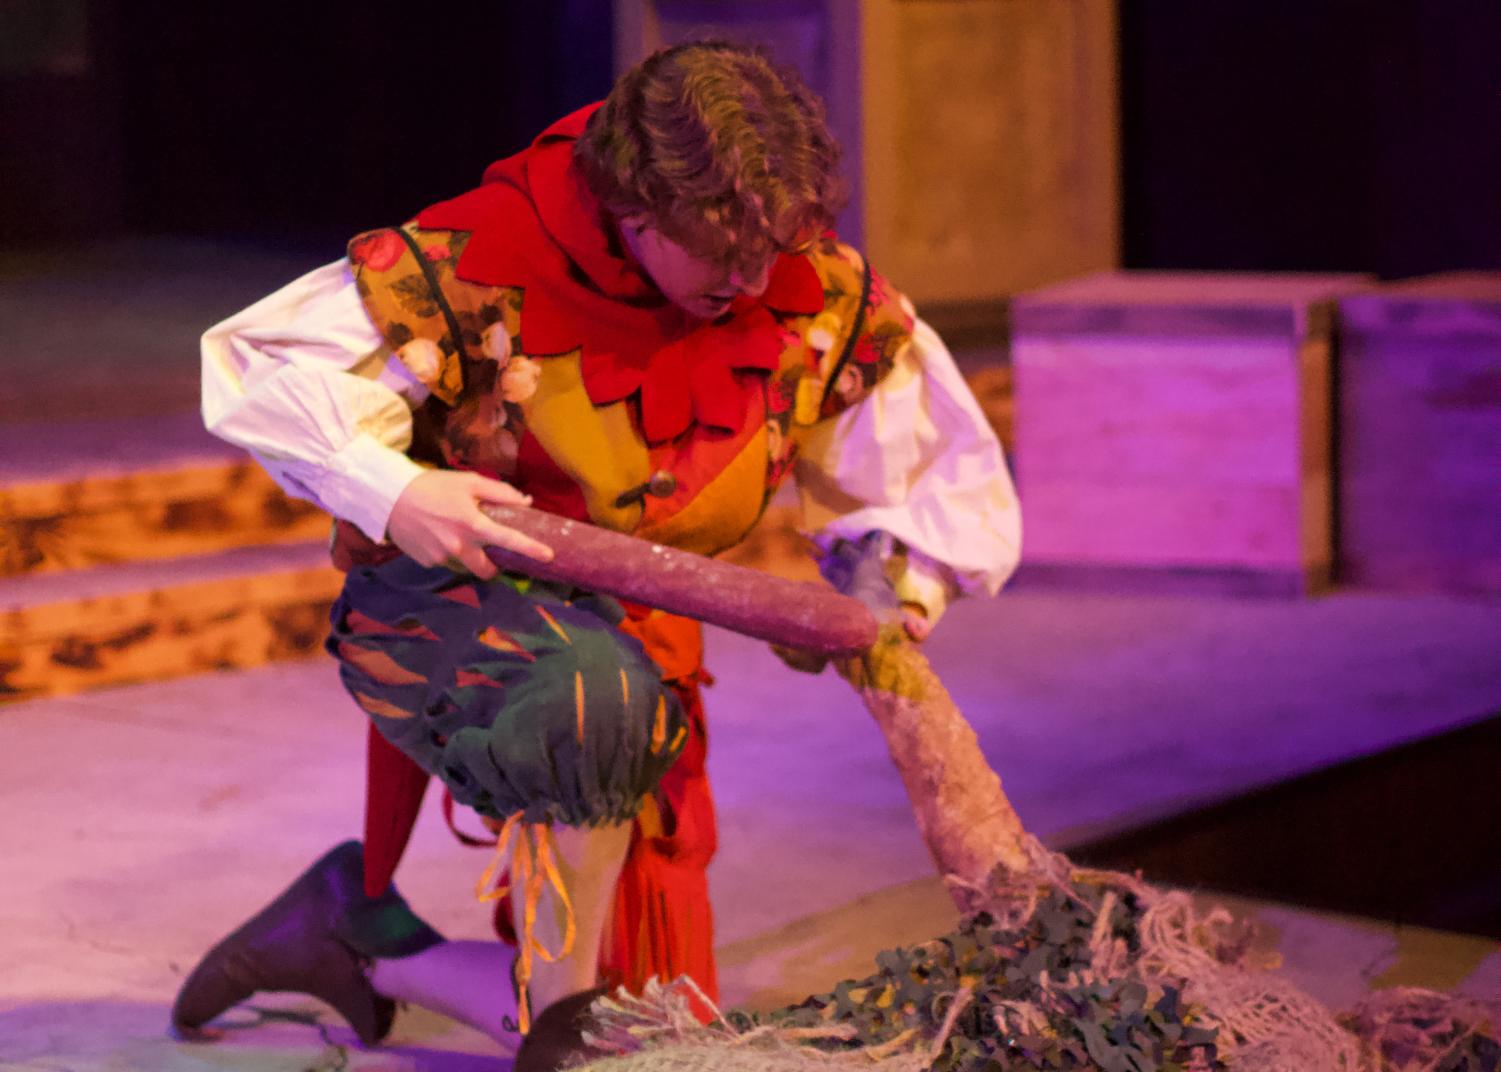 Wyatt Freihon plays Alonso&squot;s jester, Trinculo, and wears a specialty costume styled by Moorpark College costuming students in "The Tempest" on March 14, 2023.